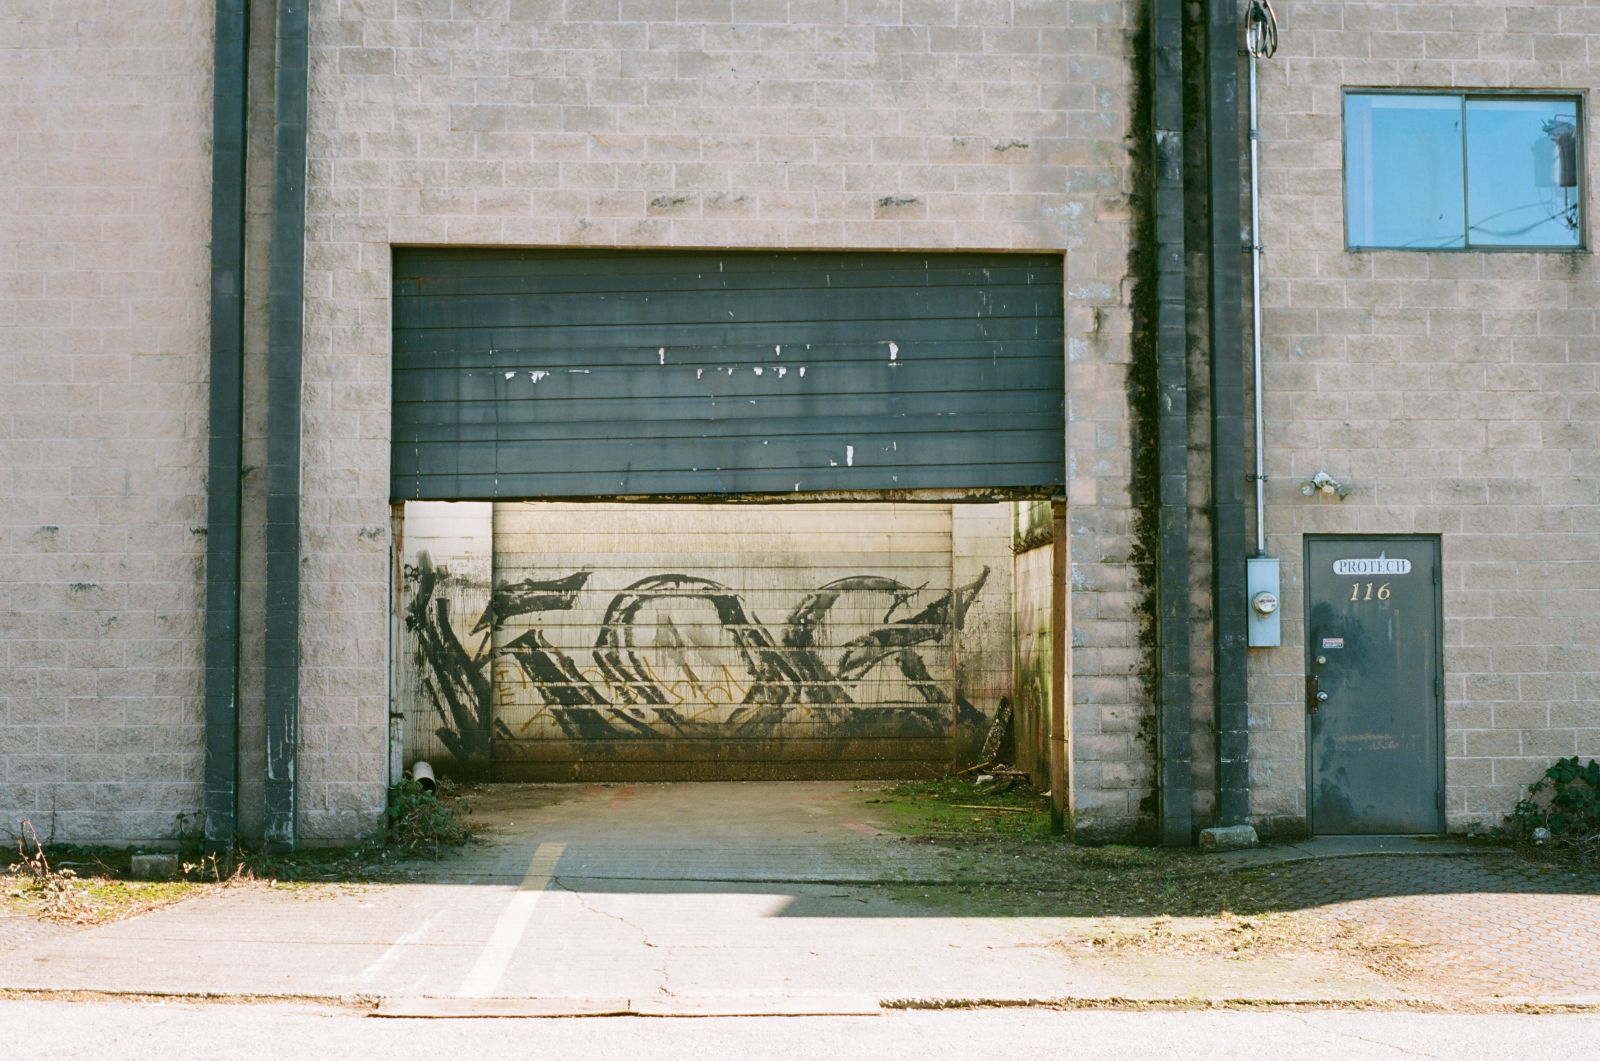 Illustration for article titled First roll of Ektar 100